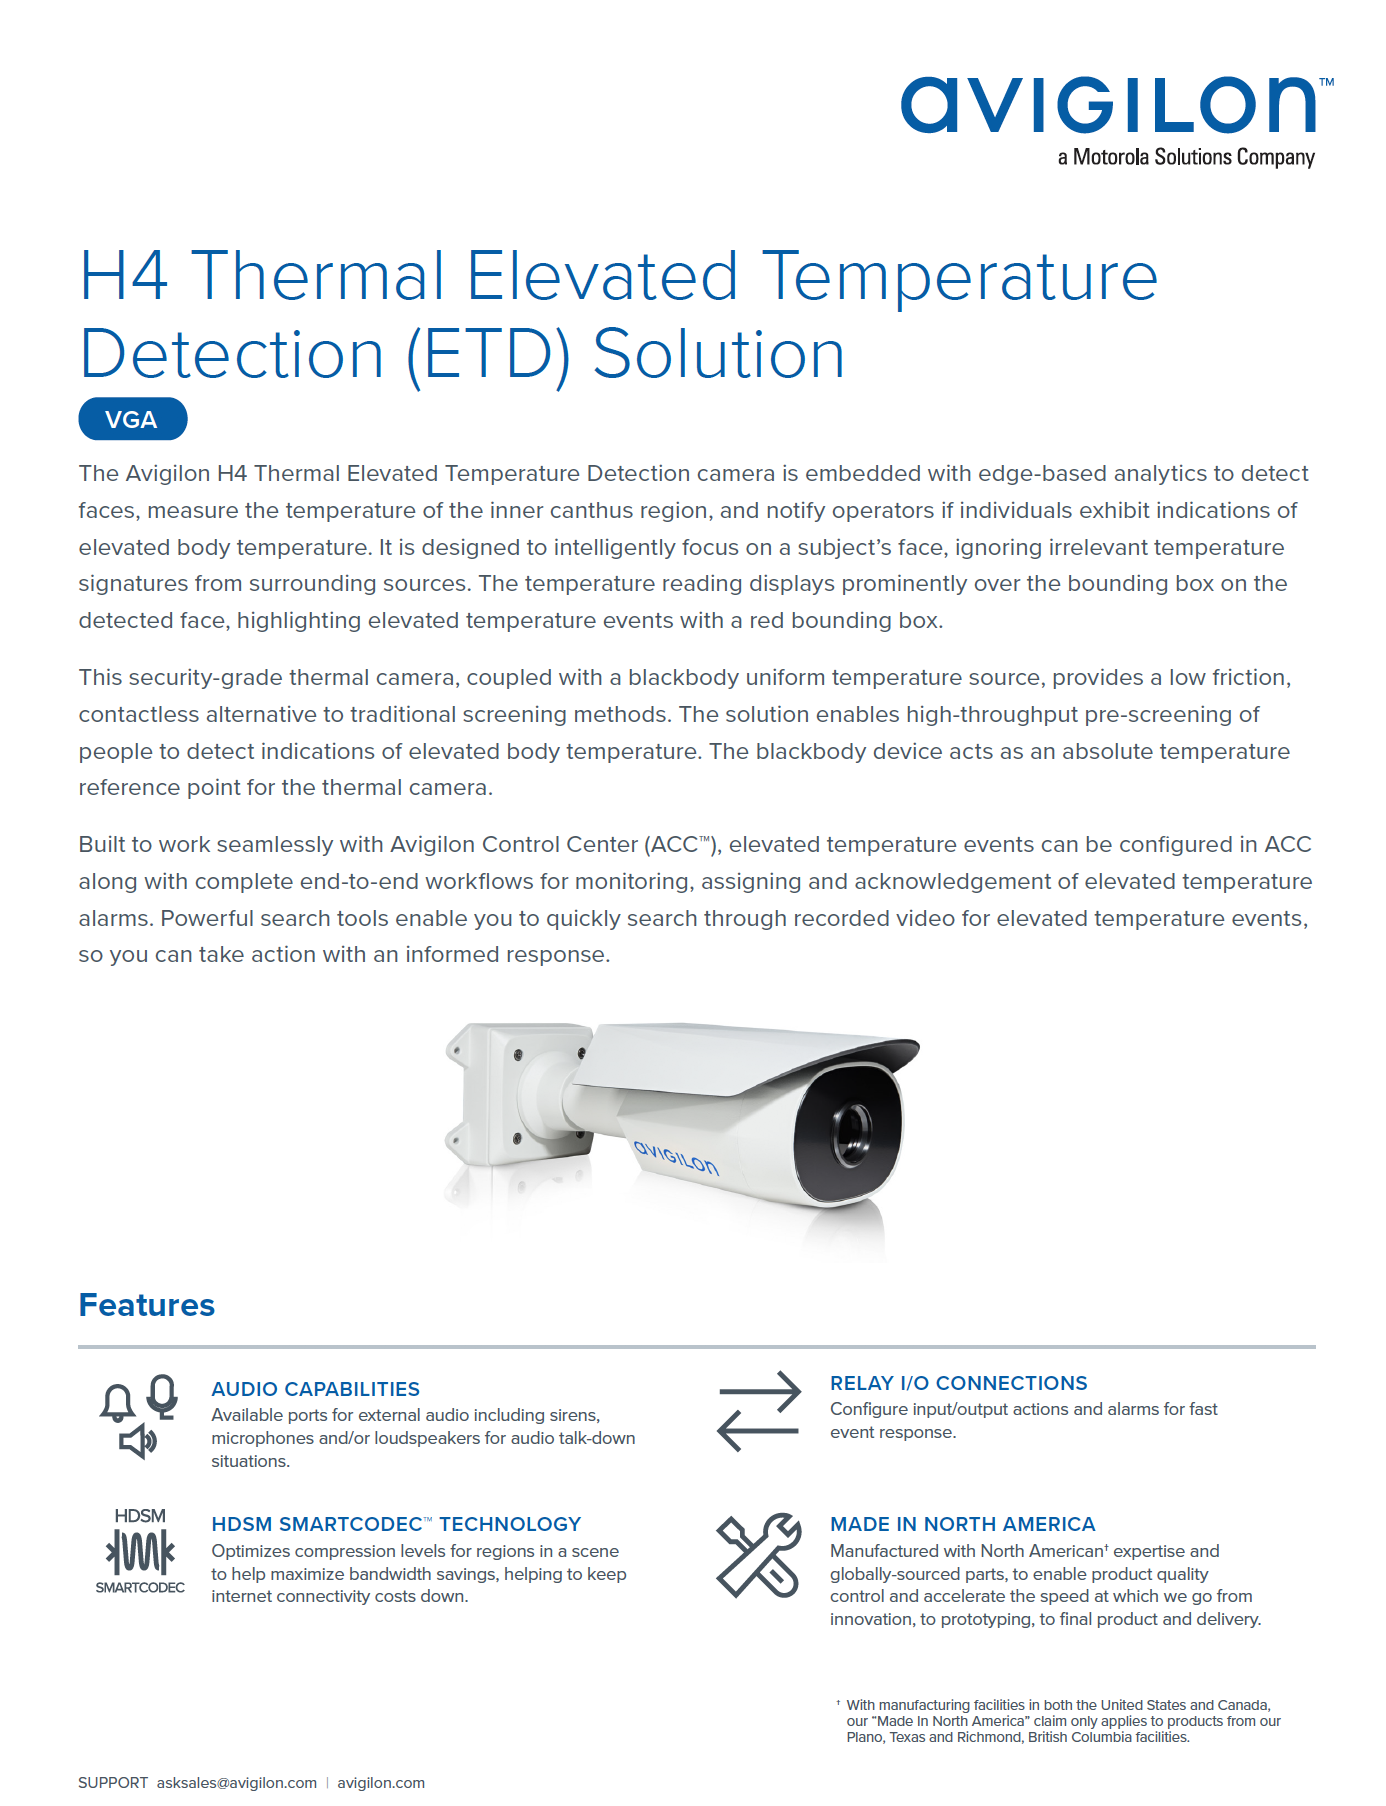 H4 Thermal camera solution Cover - aviglion.png